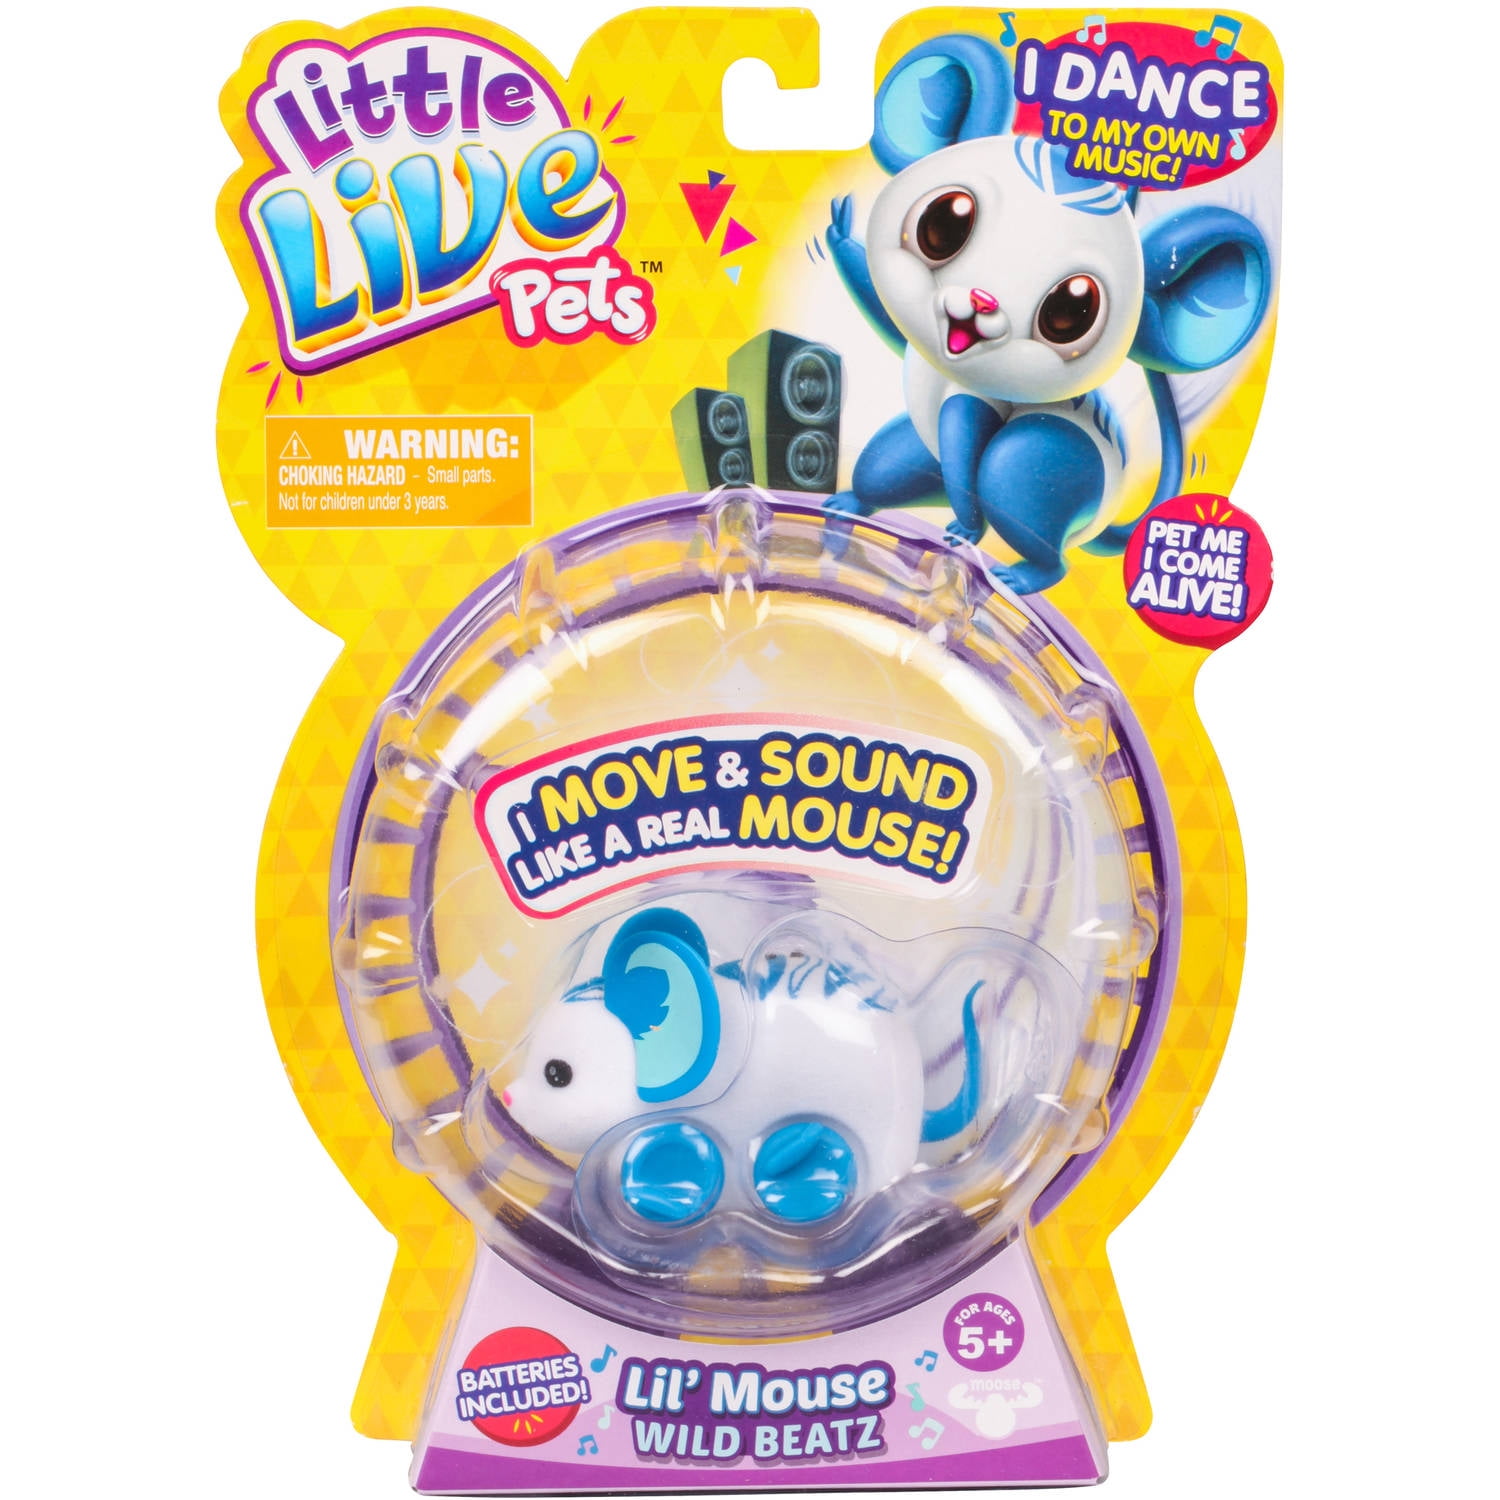 Little Live Pets S3 Lil' Mouse Single Pack, Wild Beatz | lupon.gov.ph